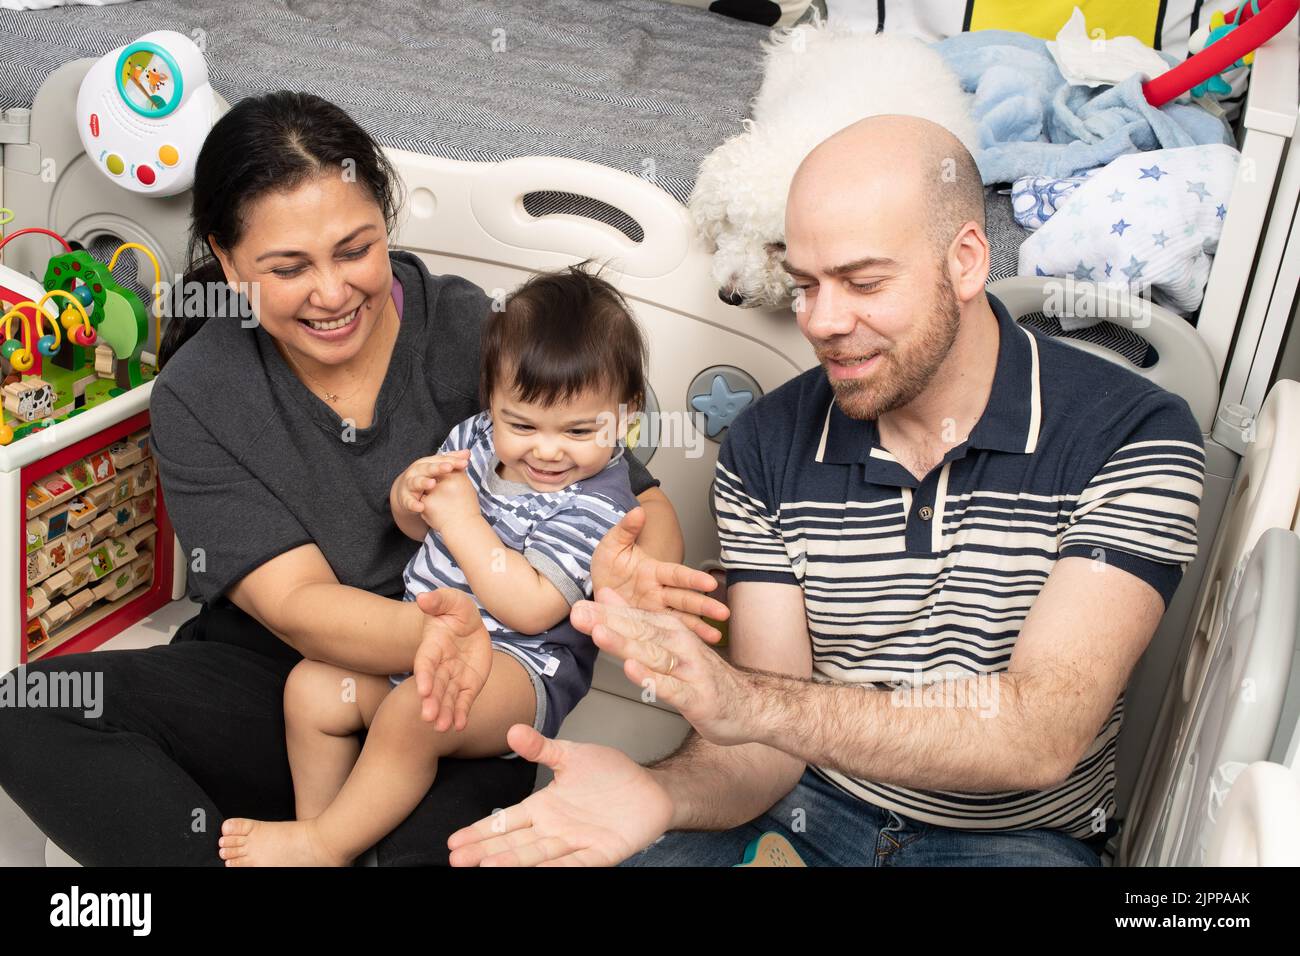 11 month old baby boy at home with parents singing song with hand gestures Stock Photo